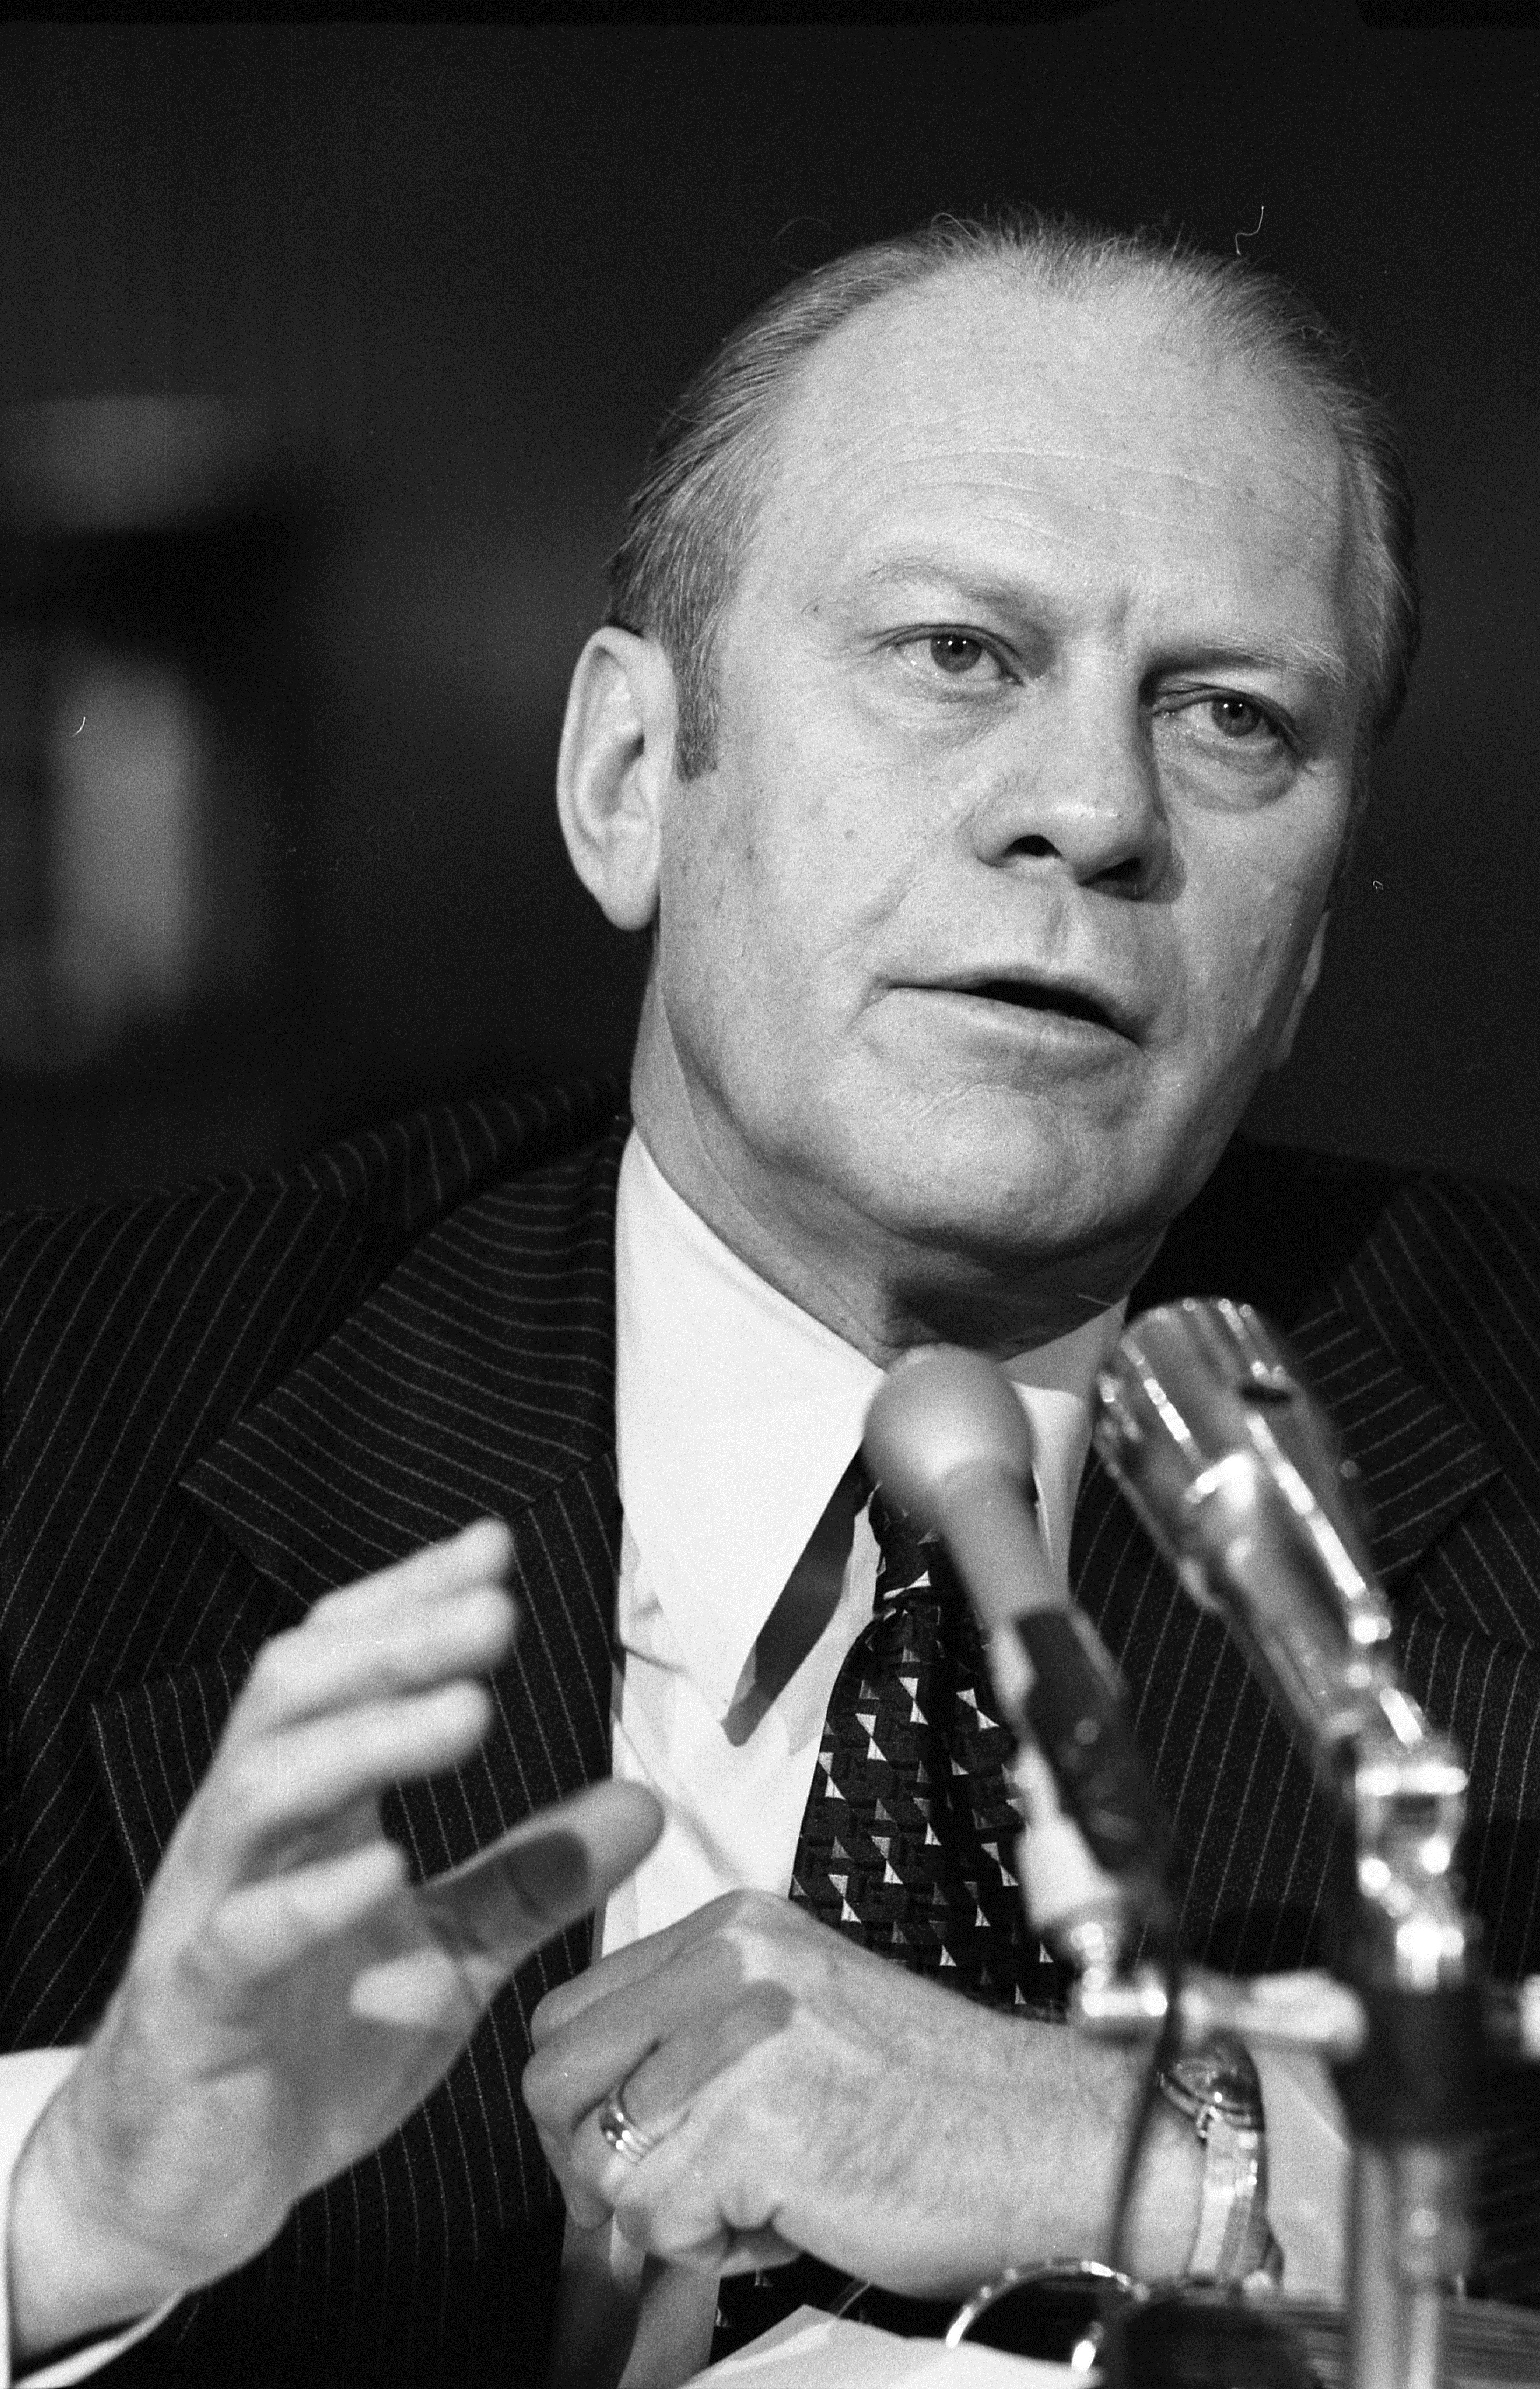 Gerald R. Ford giving testimony at his Vice Presidential confirmation hearing before the Senate Rules Committee, 11/1973.